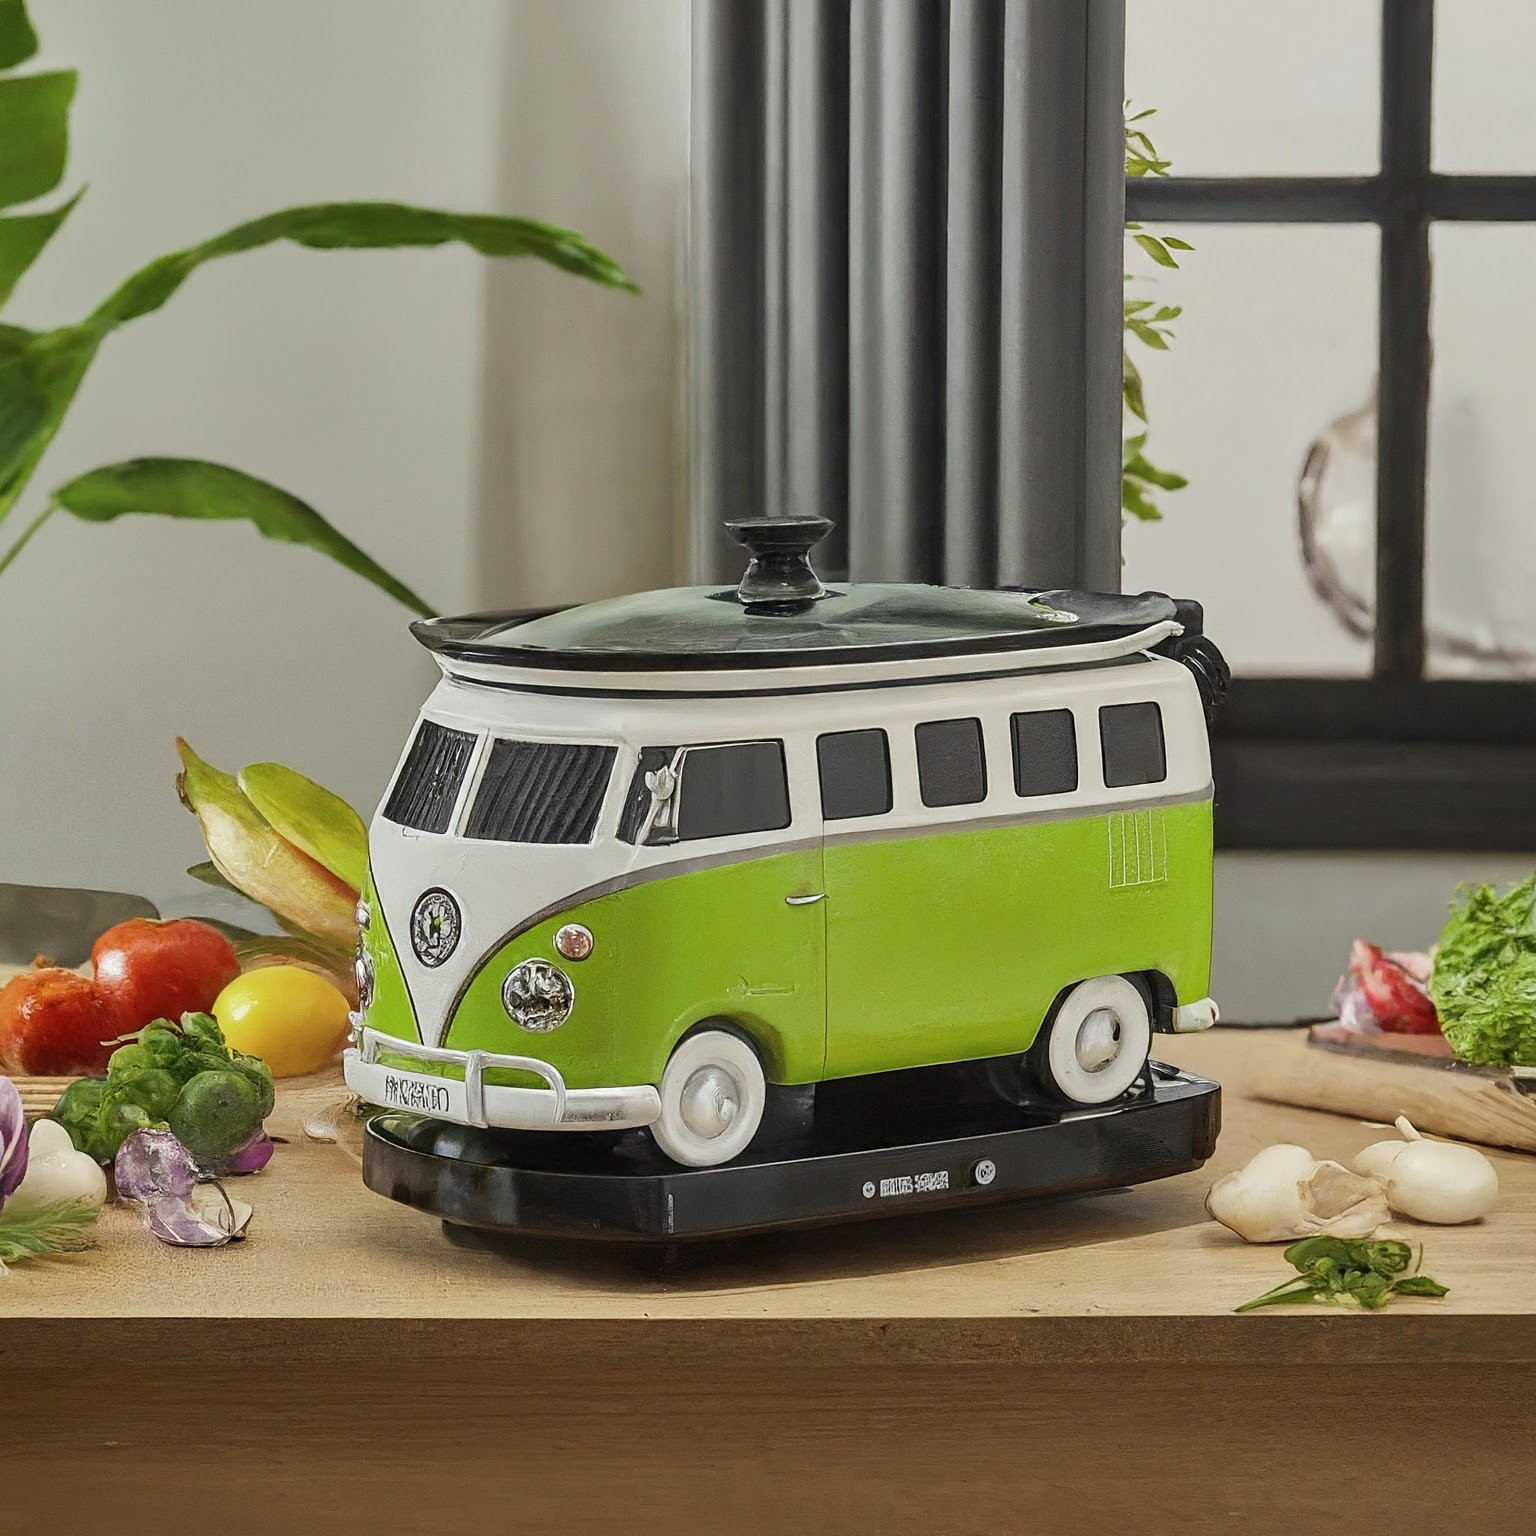 Volkswagen Bus Shaped Slow Cookers: Infusing Retro Vibes into Your Kitchen Adventure luxarts volkswagen bus slow cookers 12